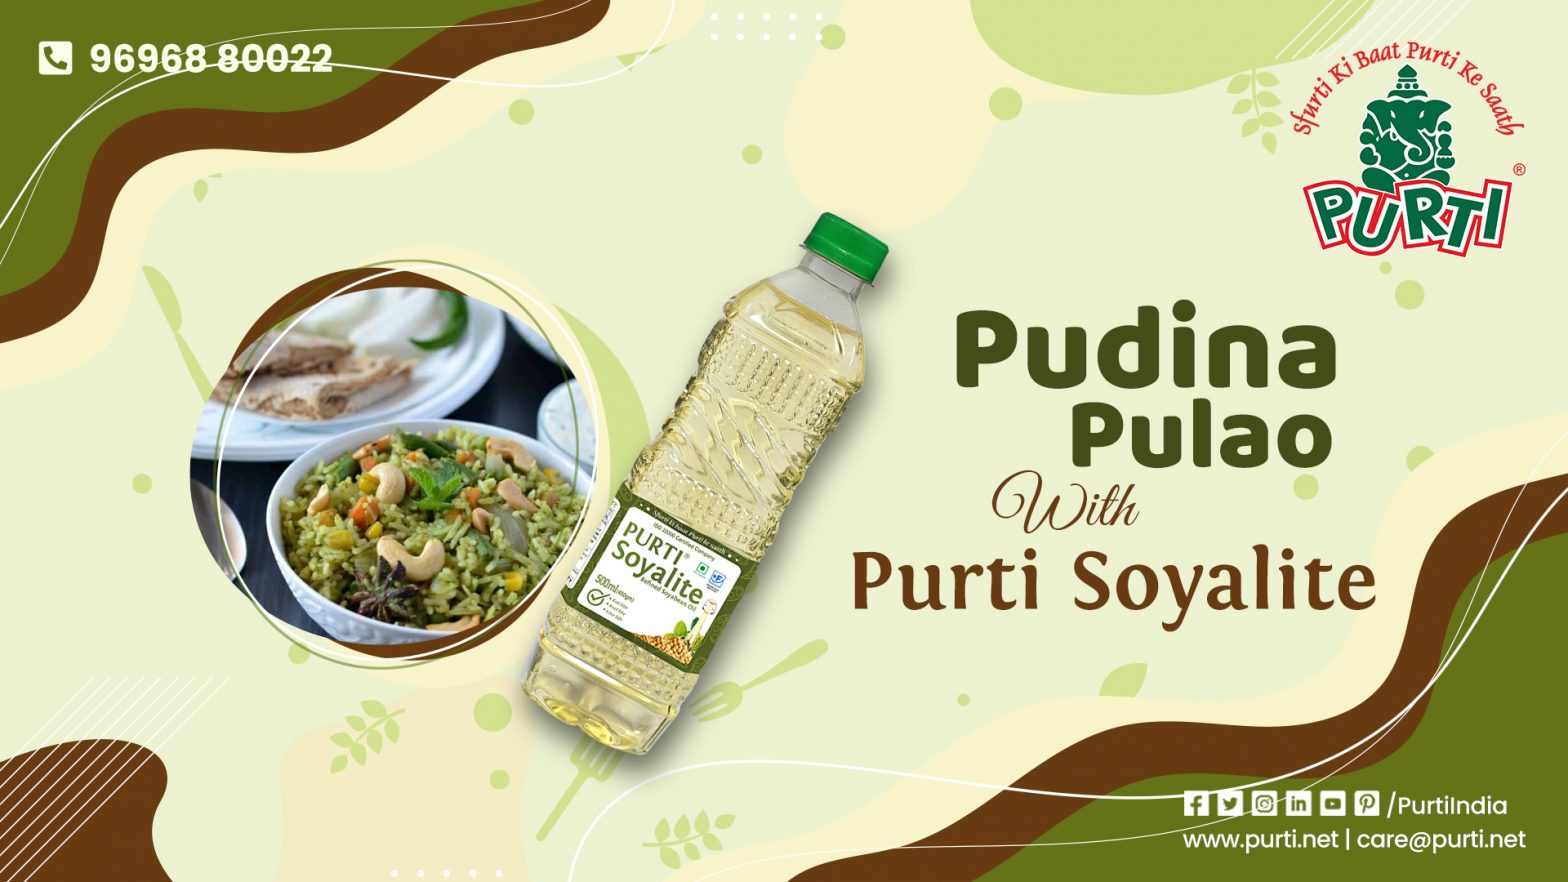 Pudina Pulao with Purti Soyalite Refined Soyabean Oil